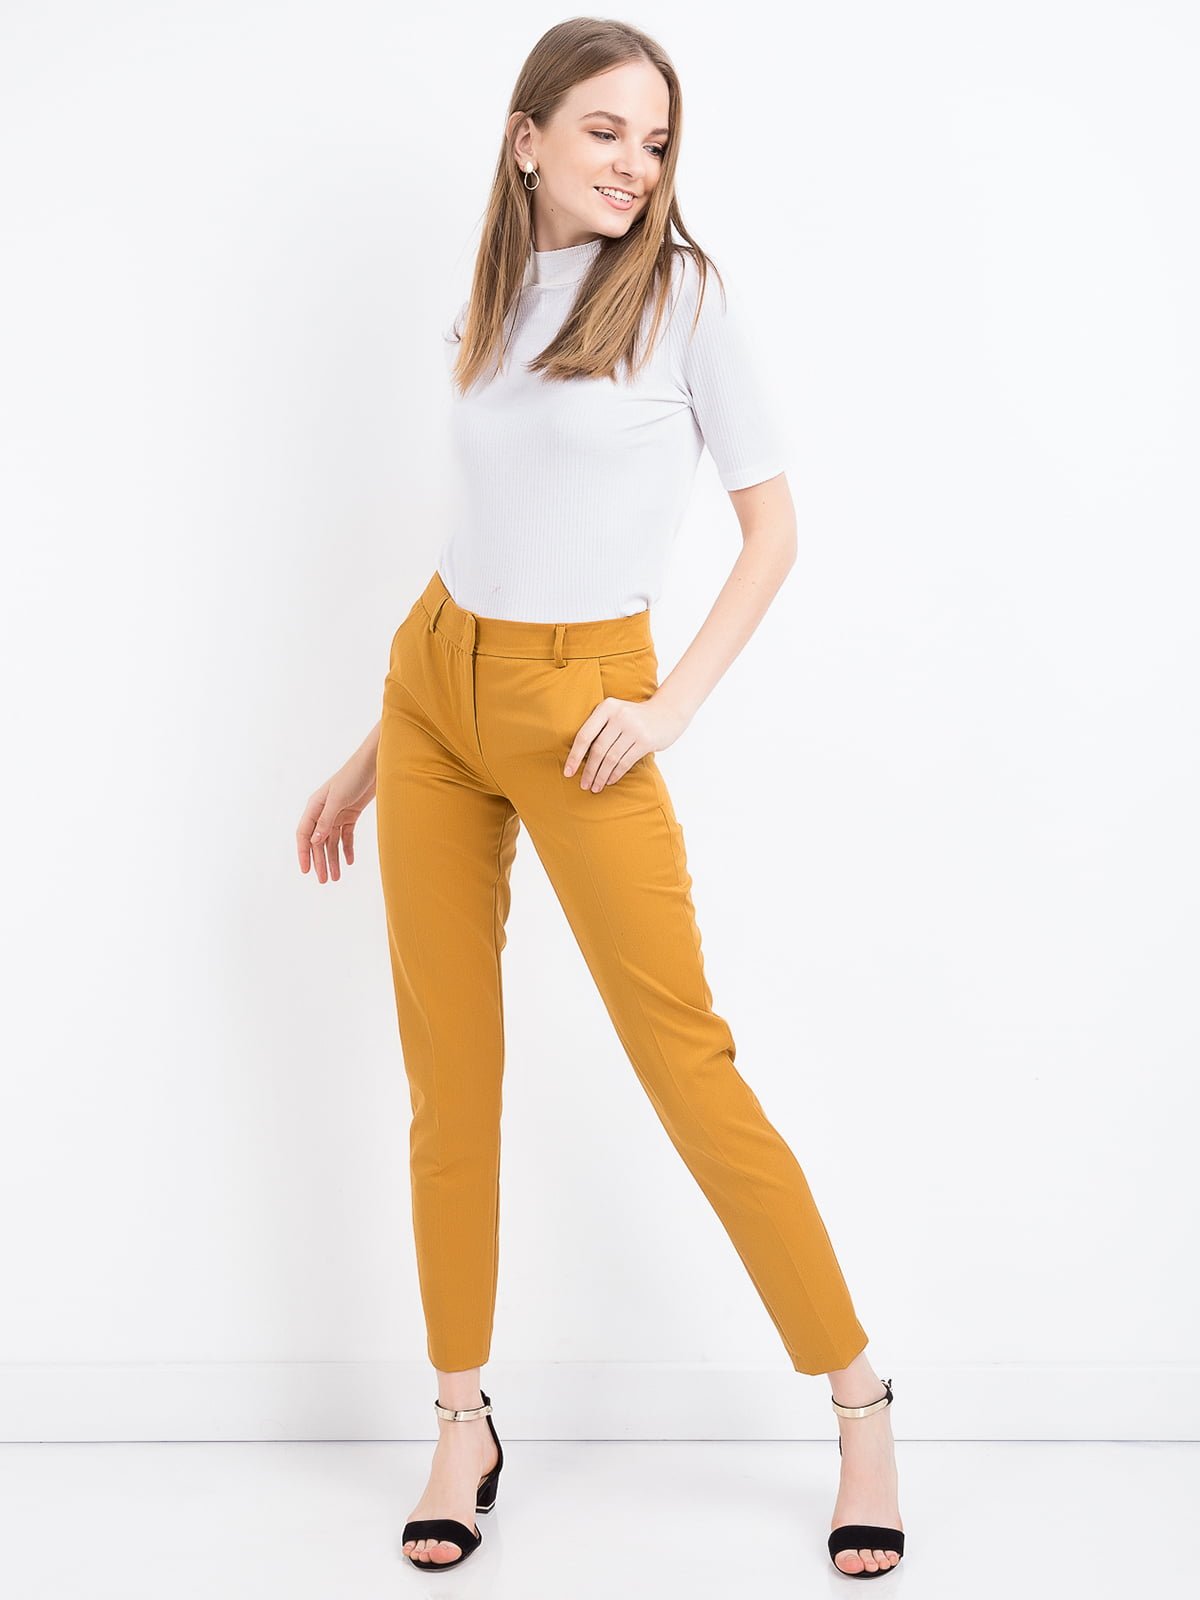 Mustard pants » Wallpapers and Images